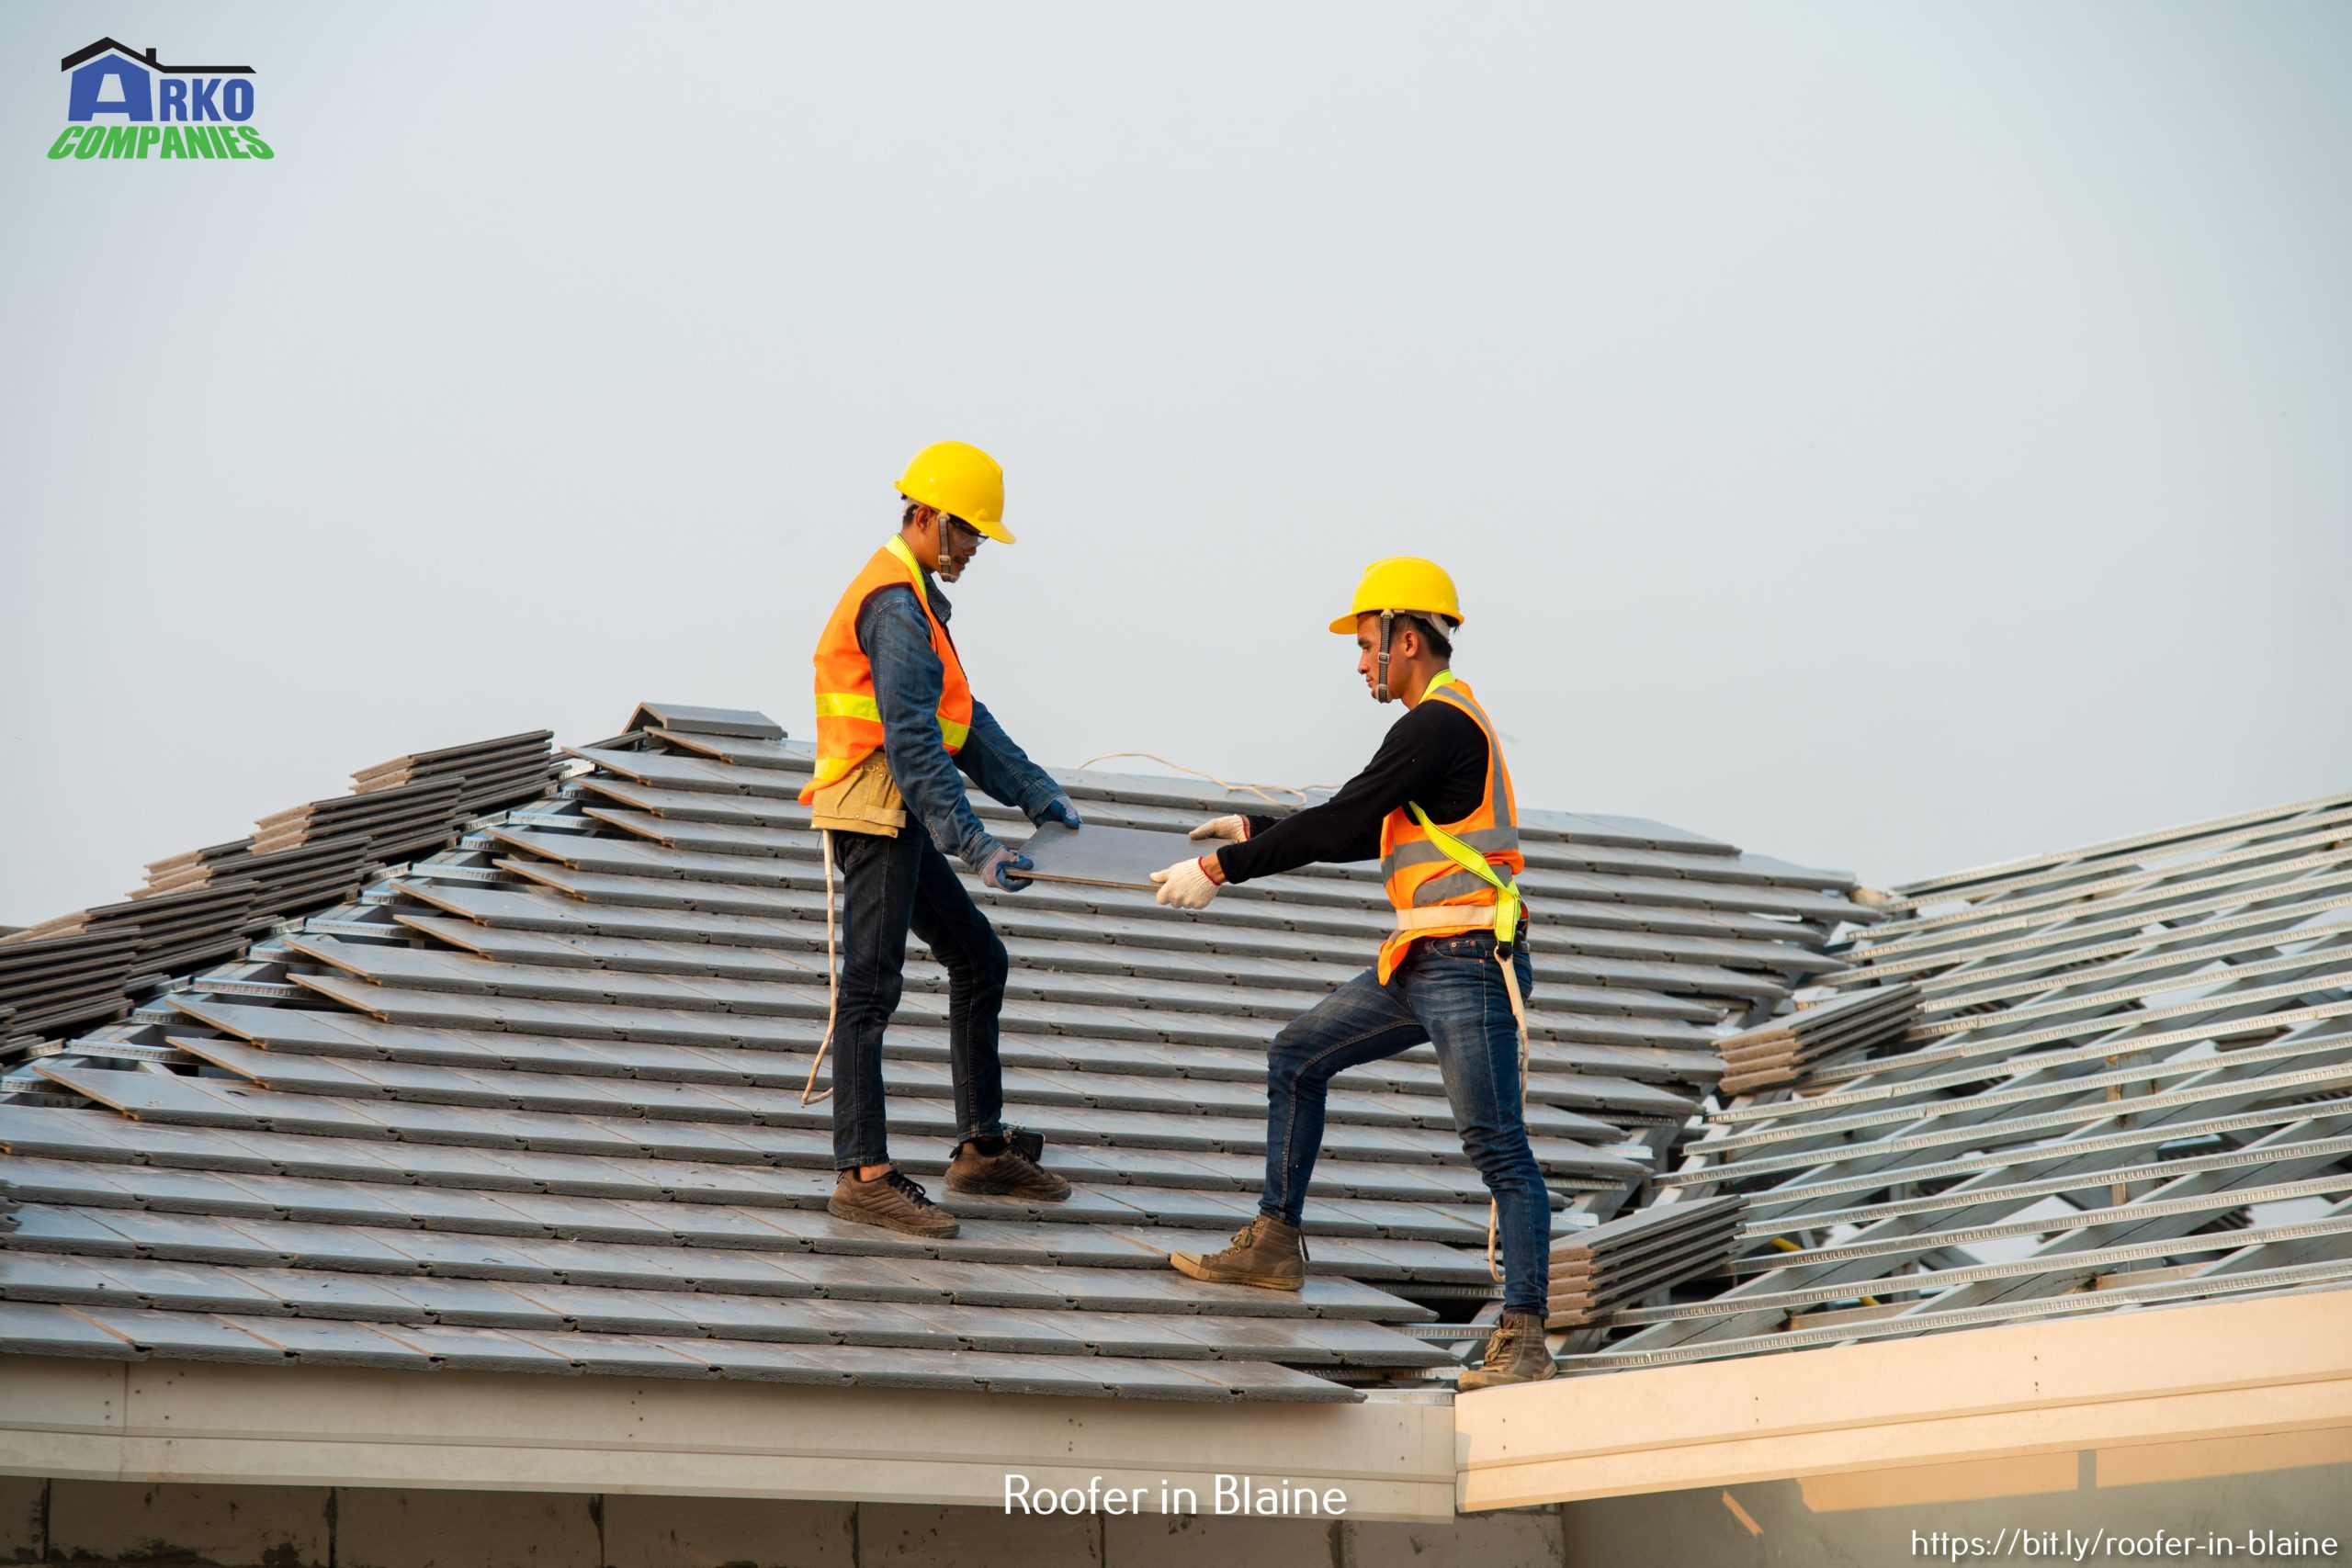 Roofing Services in Blaine, MN